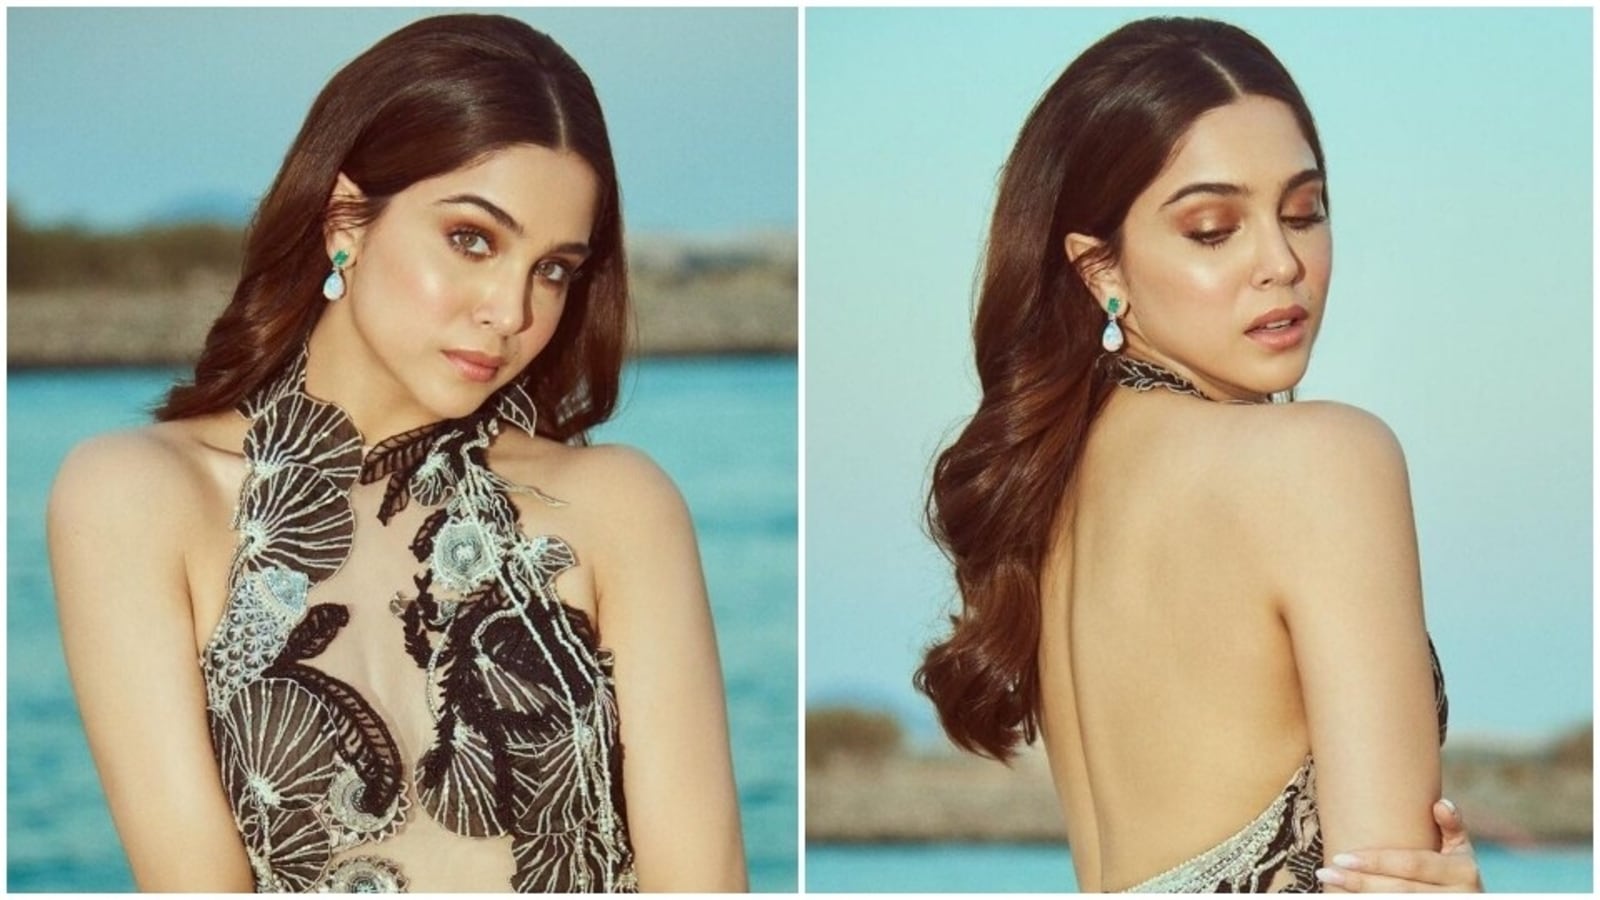 IIFA Awards 2022: Sharvari Wagh channels sea princess vibes for her first IIFA Awards in a backless gown, see pics